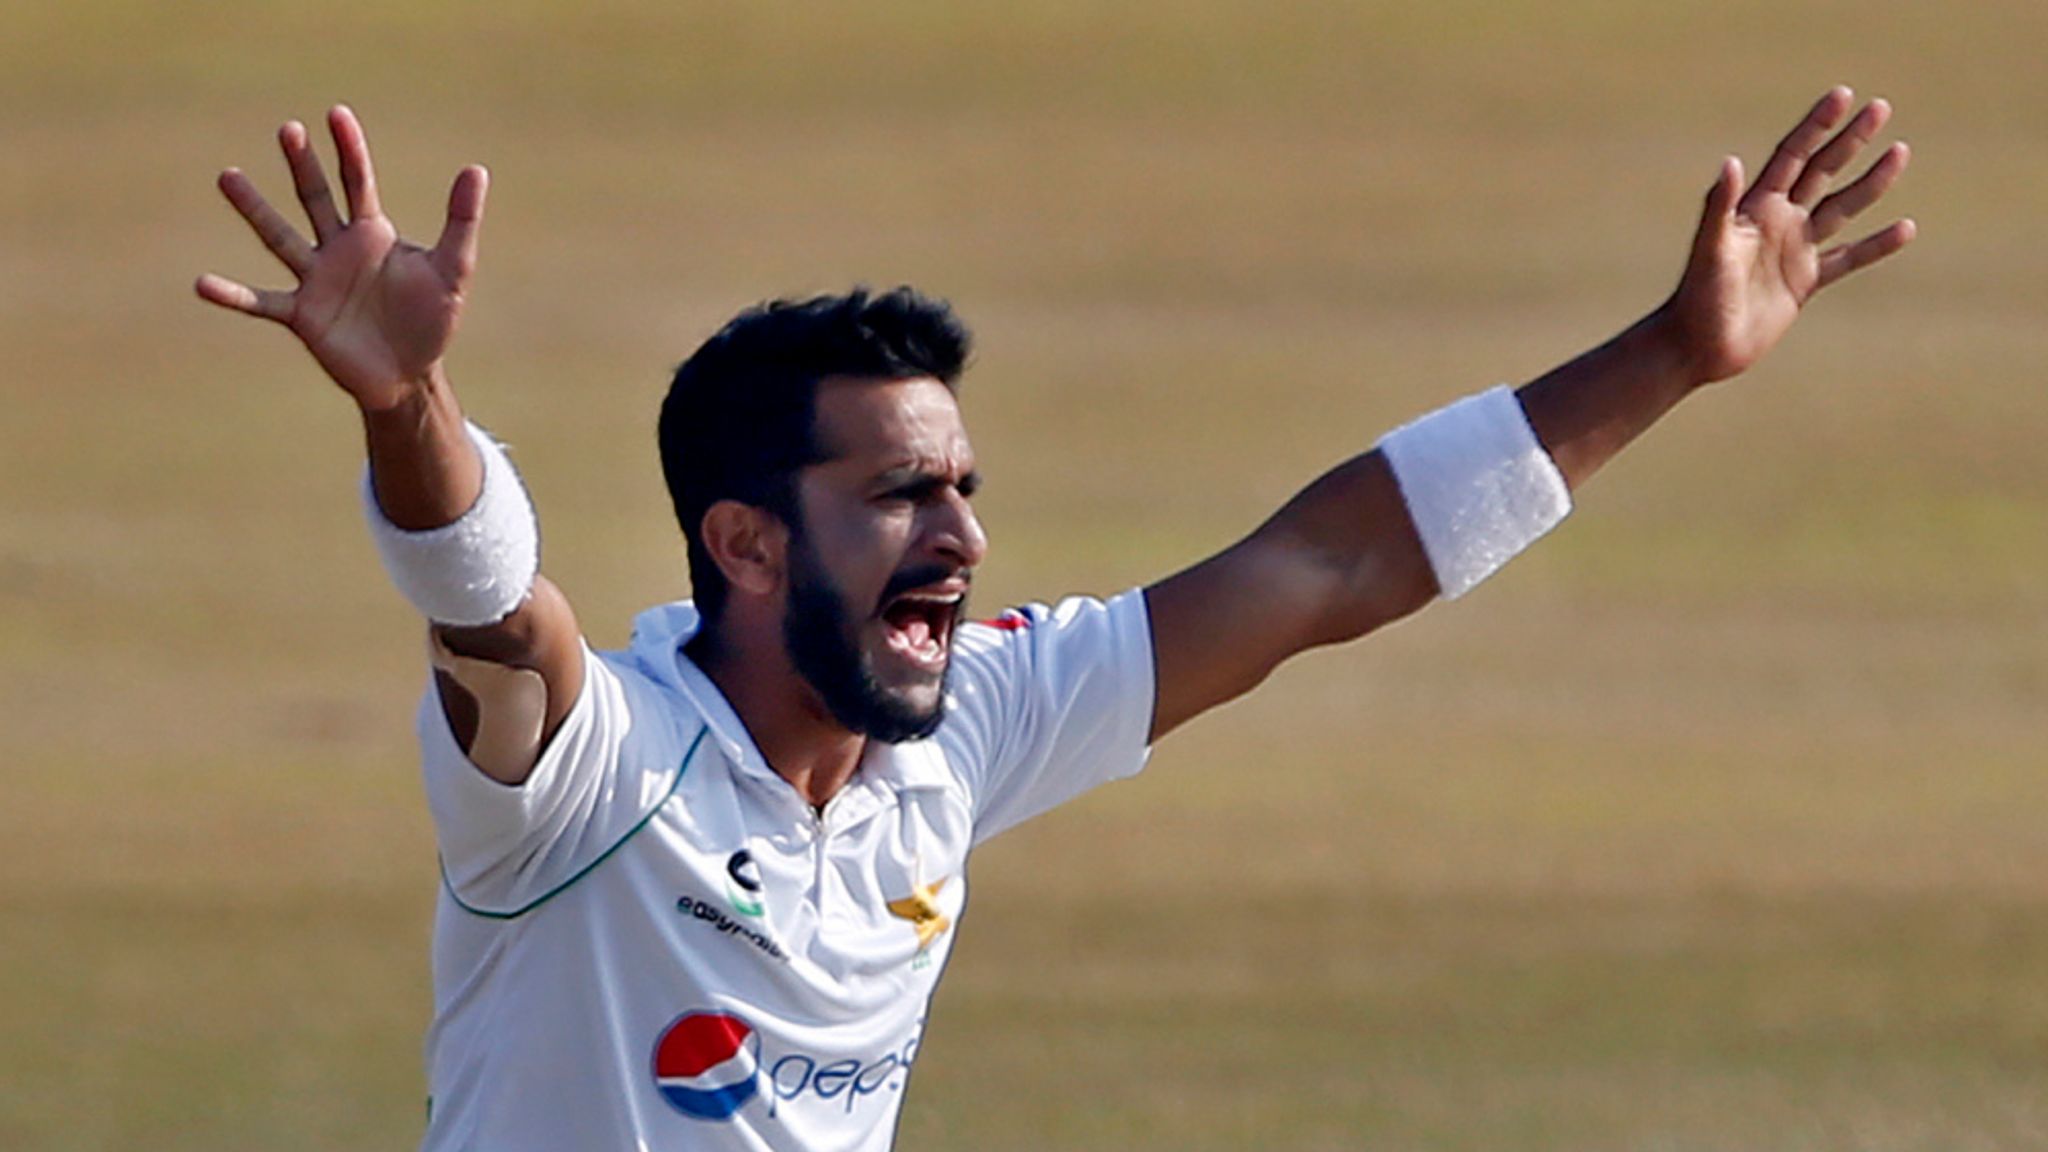 Pakistan's Hasan Ali takes five wickets to secure innings victory over  Zimbabwe in Harare | Cricket News | Sky Sports